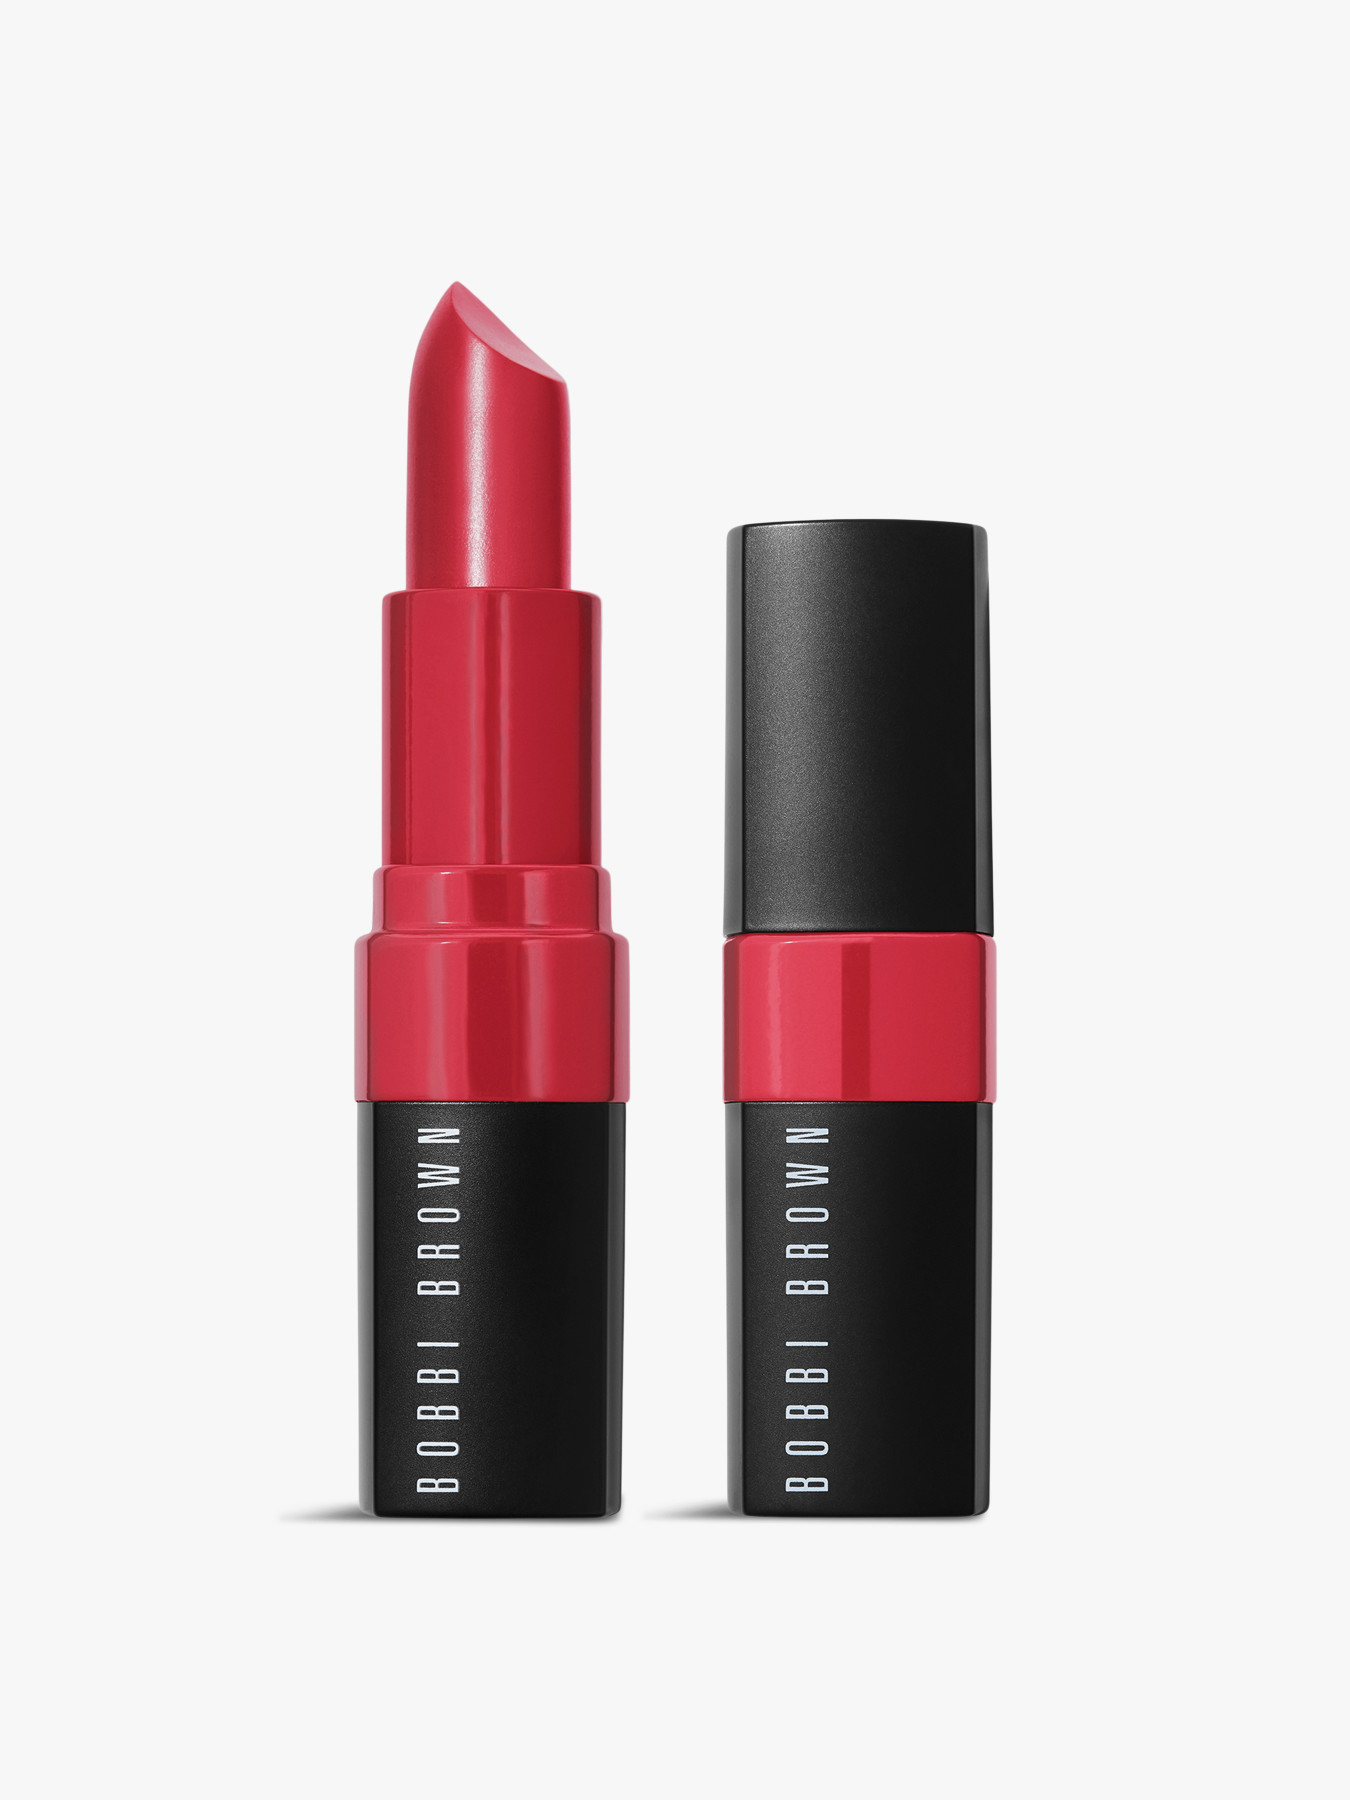 Bobbi Brown Crushed Lip Colour Limited Edition Berry Bright